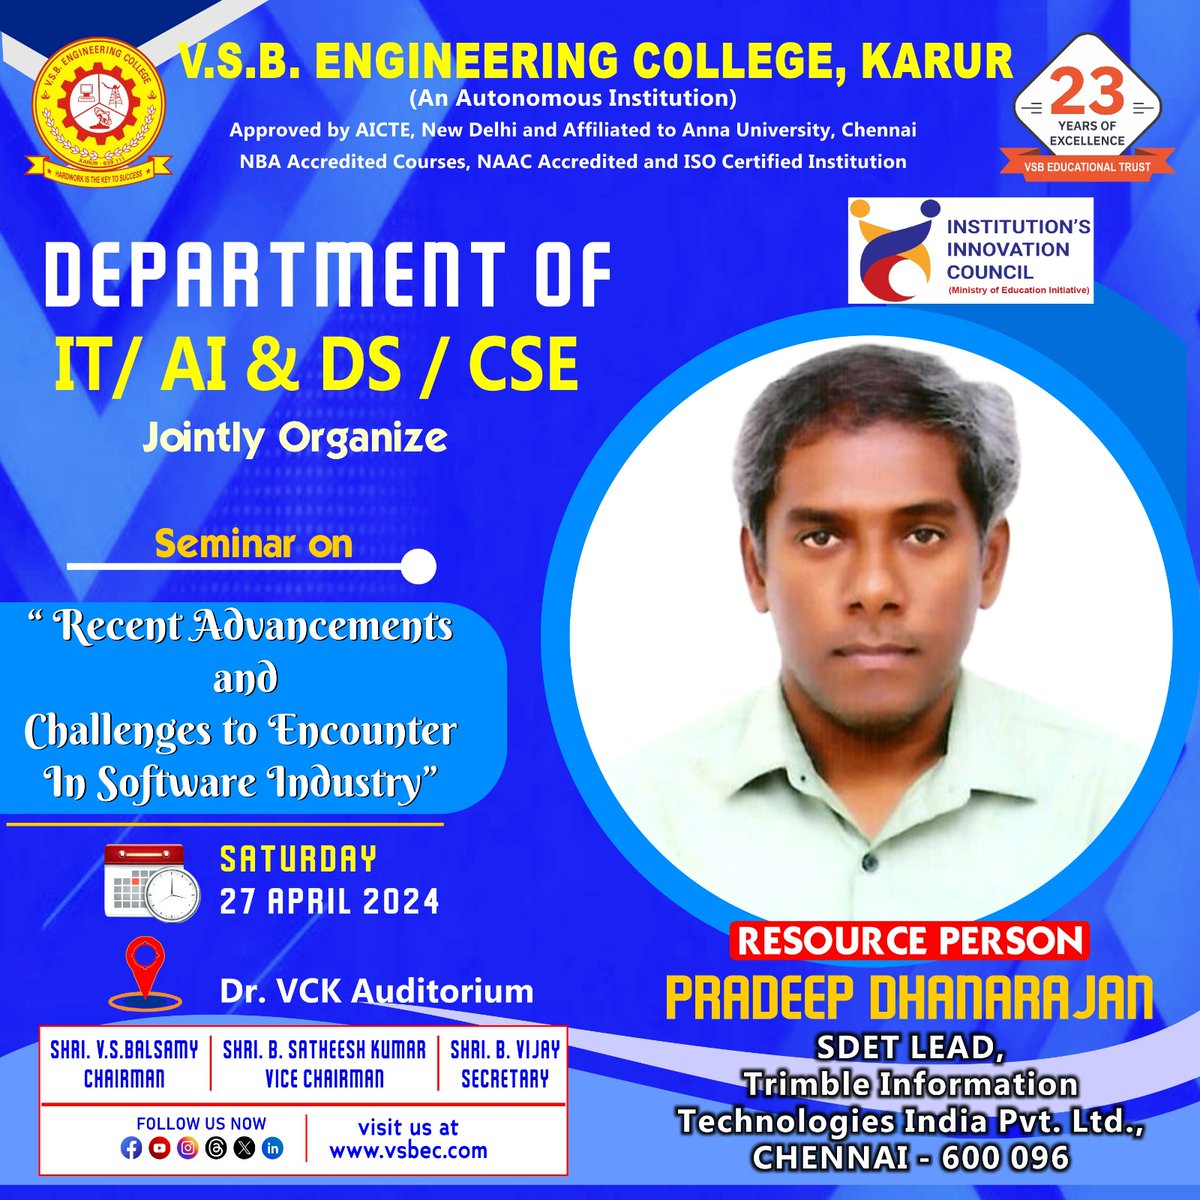 📢 Seminar Alert 📢

Join us for an insightful seminar on 'Recent Advancements and Challenges in the Software Industry' organized by the Departments of IT, CSE, and AI&DS.

🗣 Speaker: Mr. Pradeep Dhanarajan, SDET Lead  
🏢 Organization: Trimble IT Pvt. Ltd, Chennai